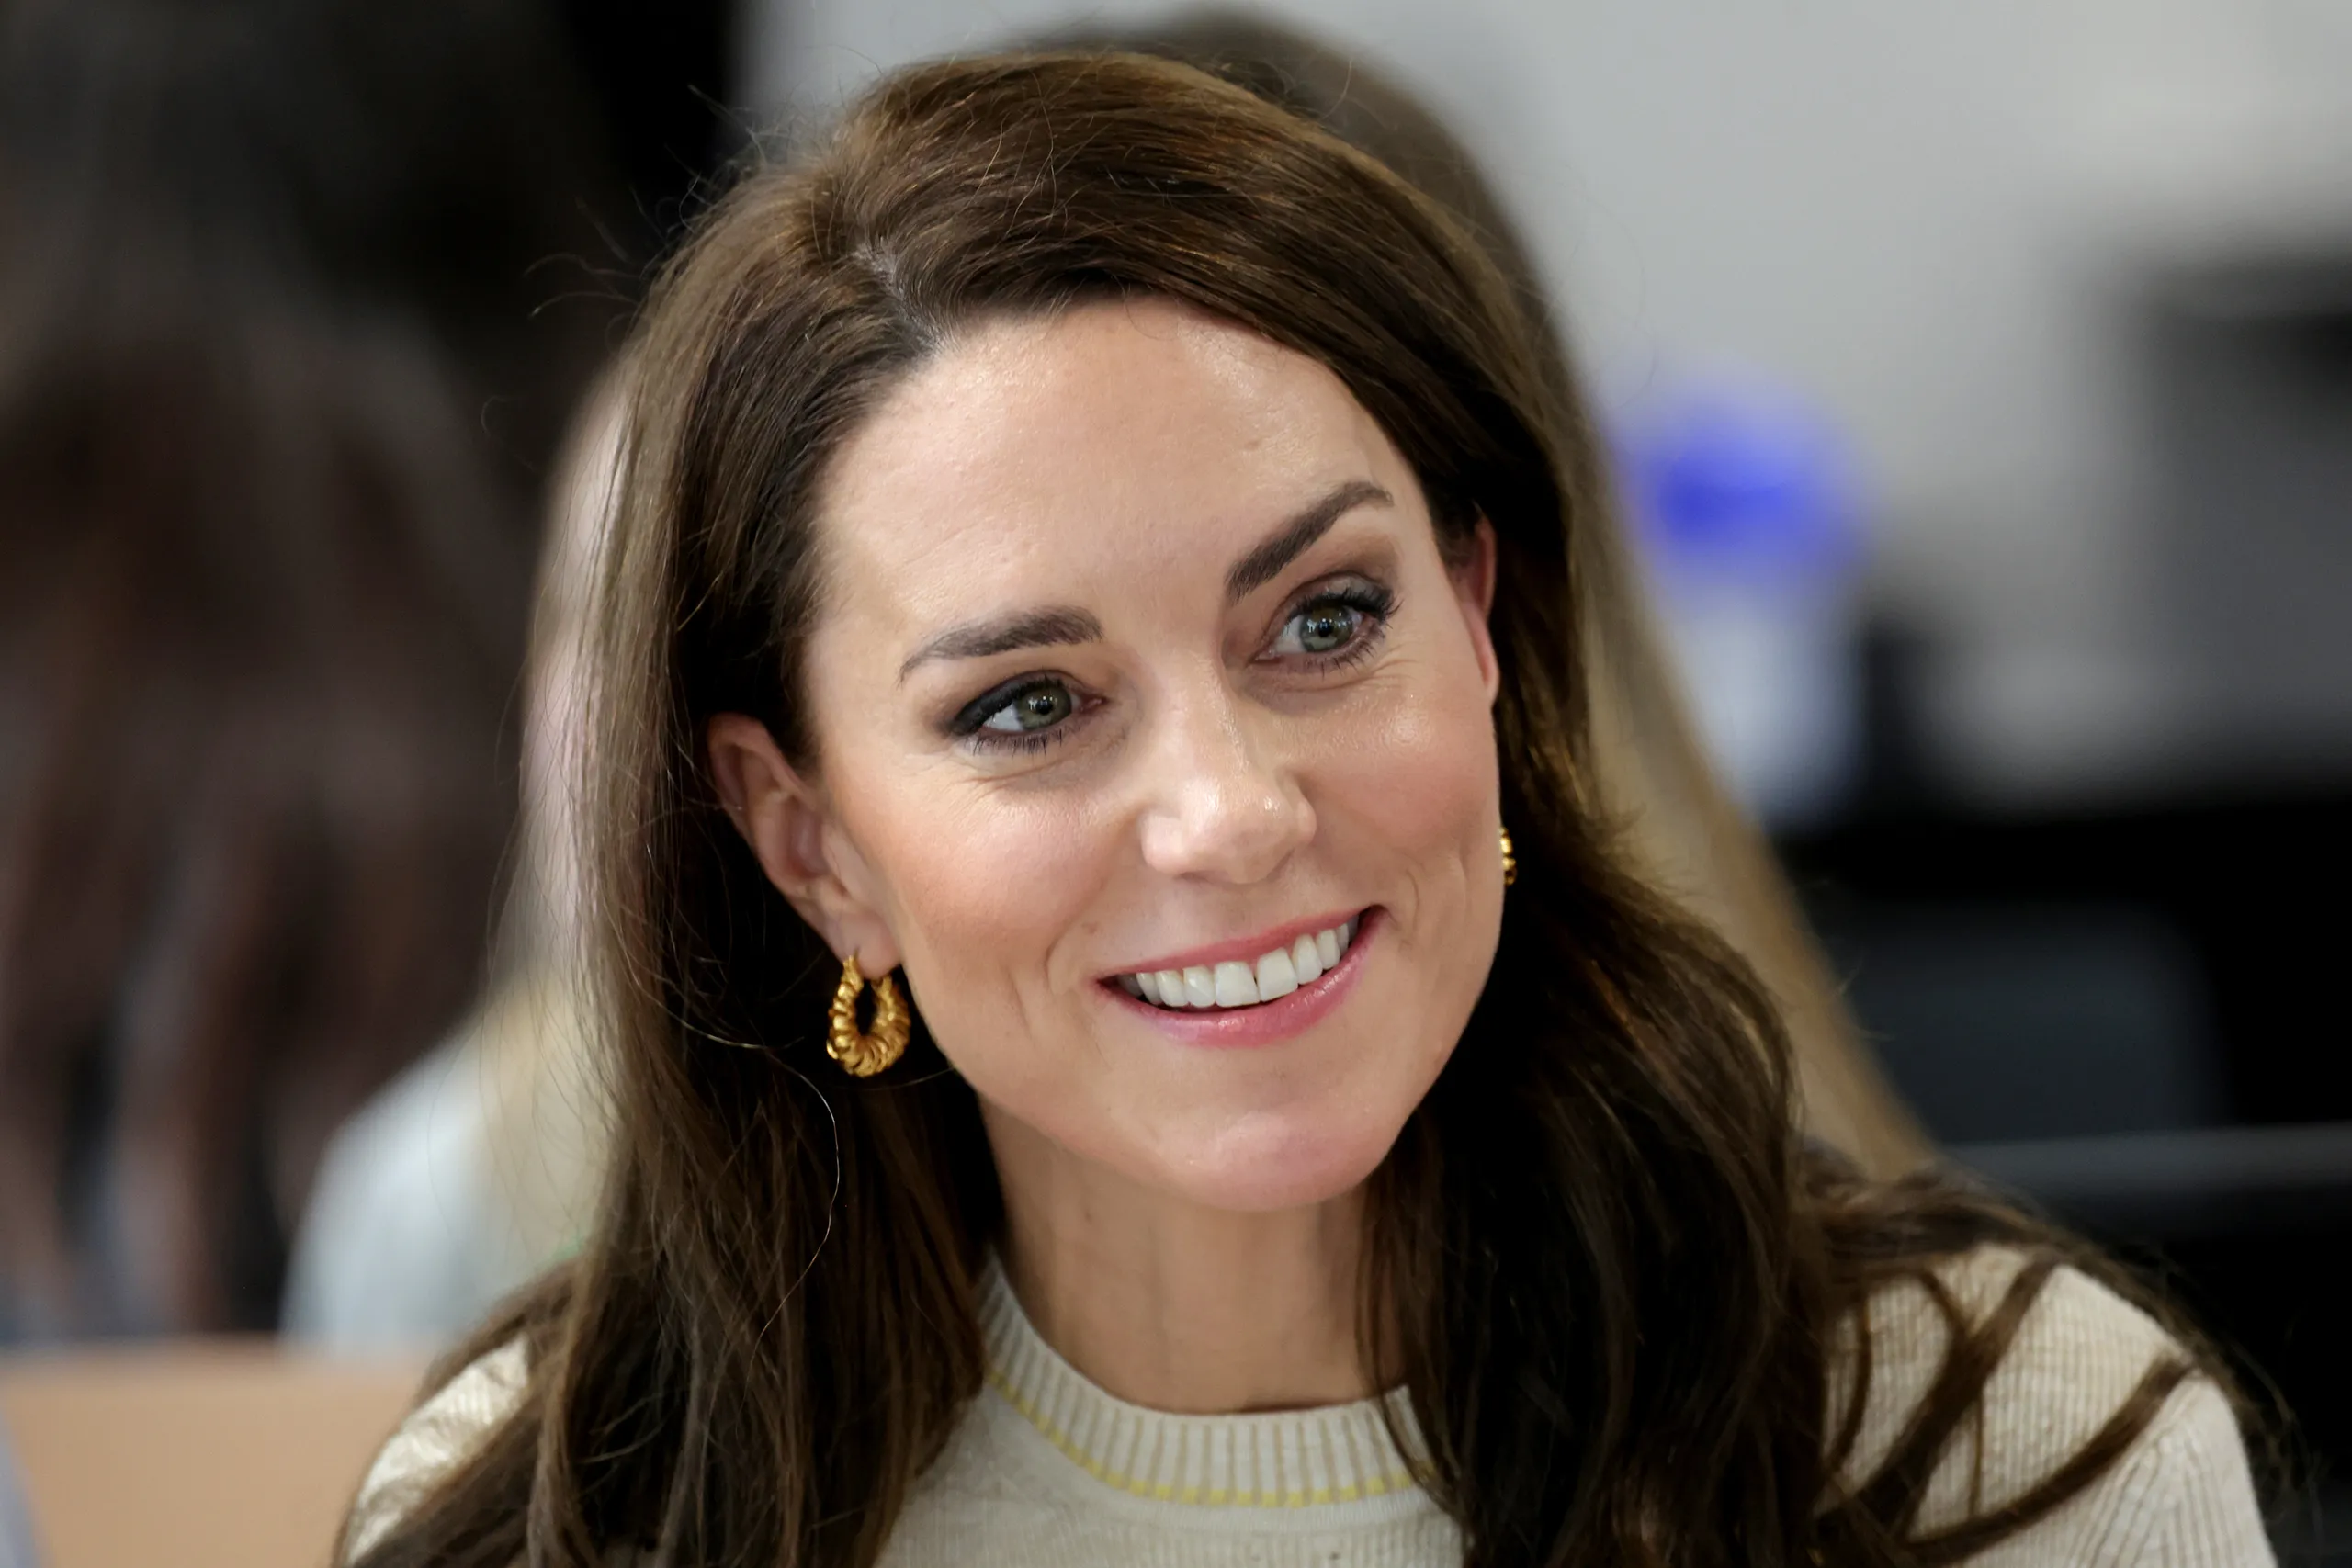 Kate Middleton's recovery raises concerns within british royalty, says expert